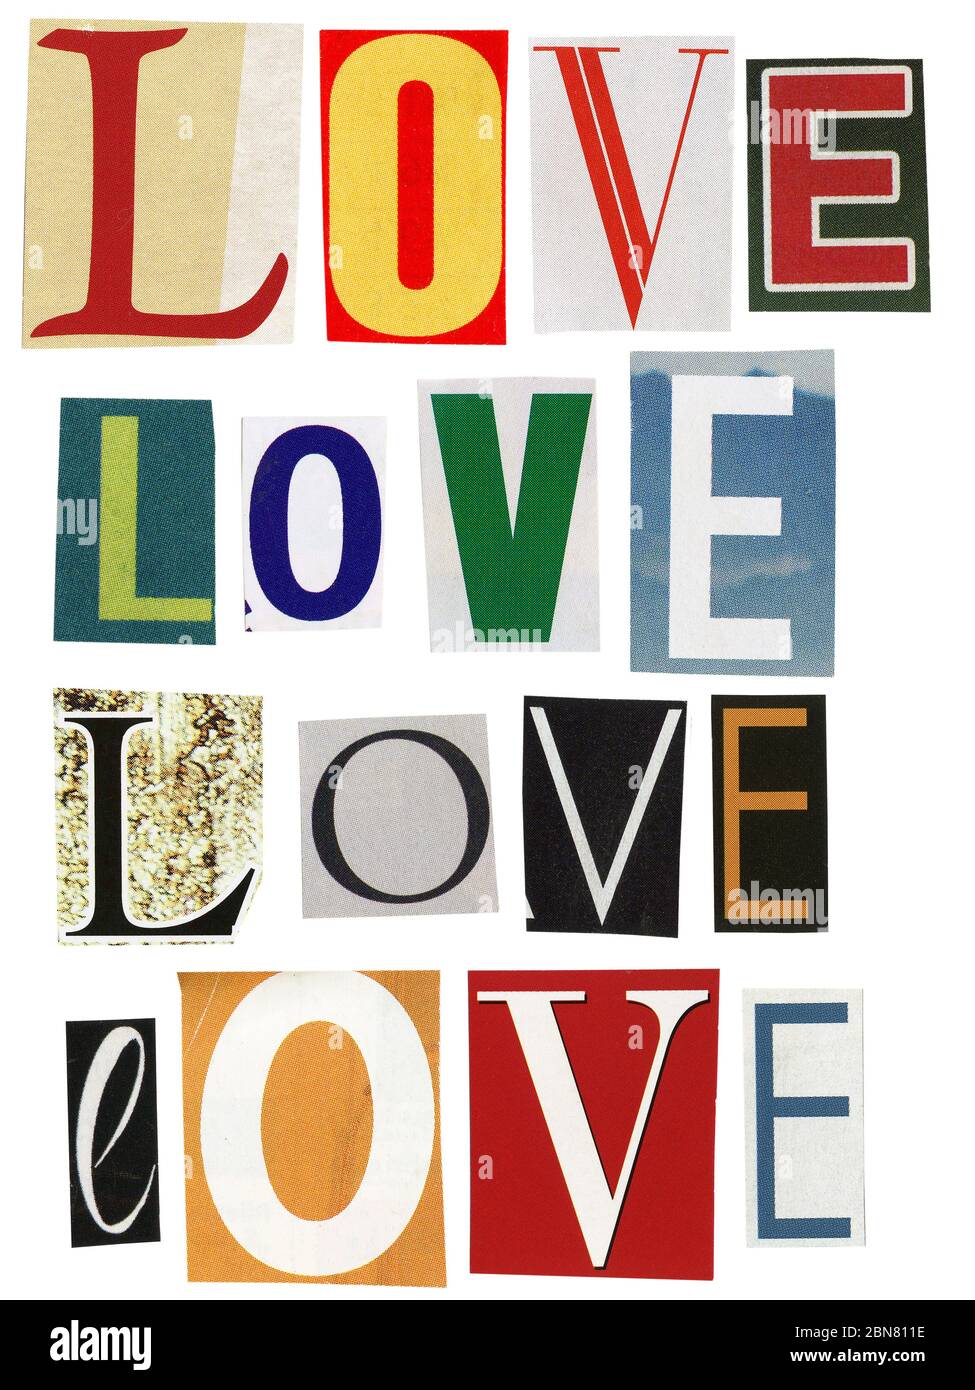 Love word made of newspaper clippings isolated on white background. Stock Photo